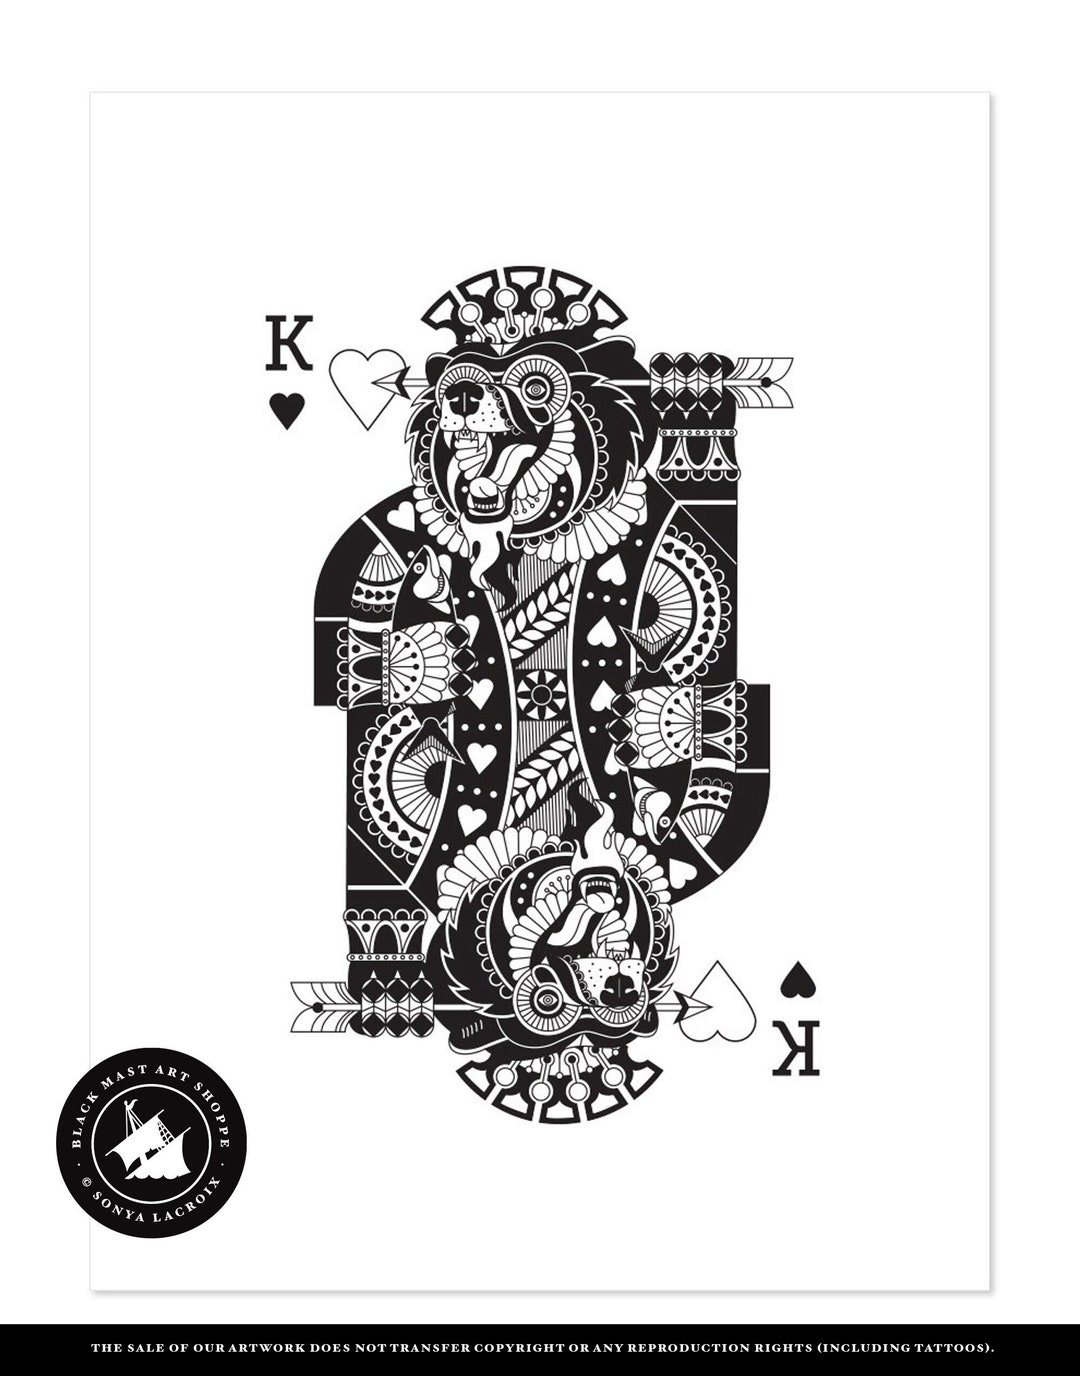 King Queen and Jack of Hearts Playing Cards Cross Stitch -  Israel